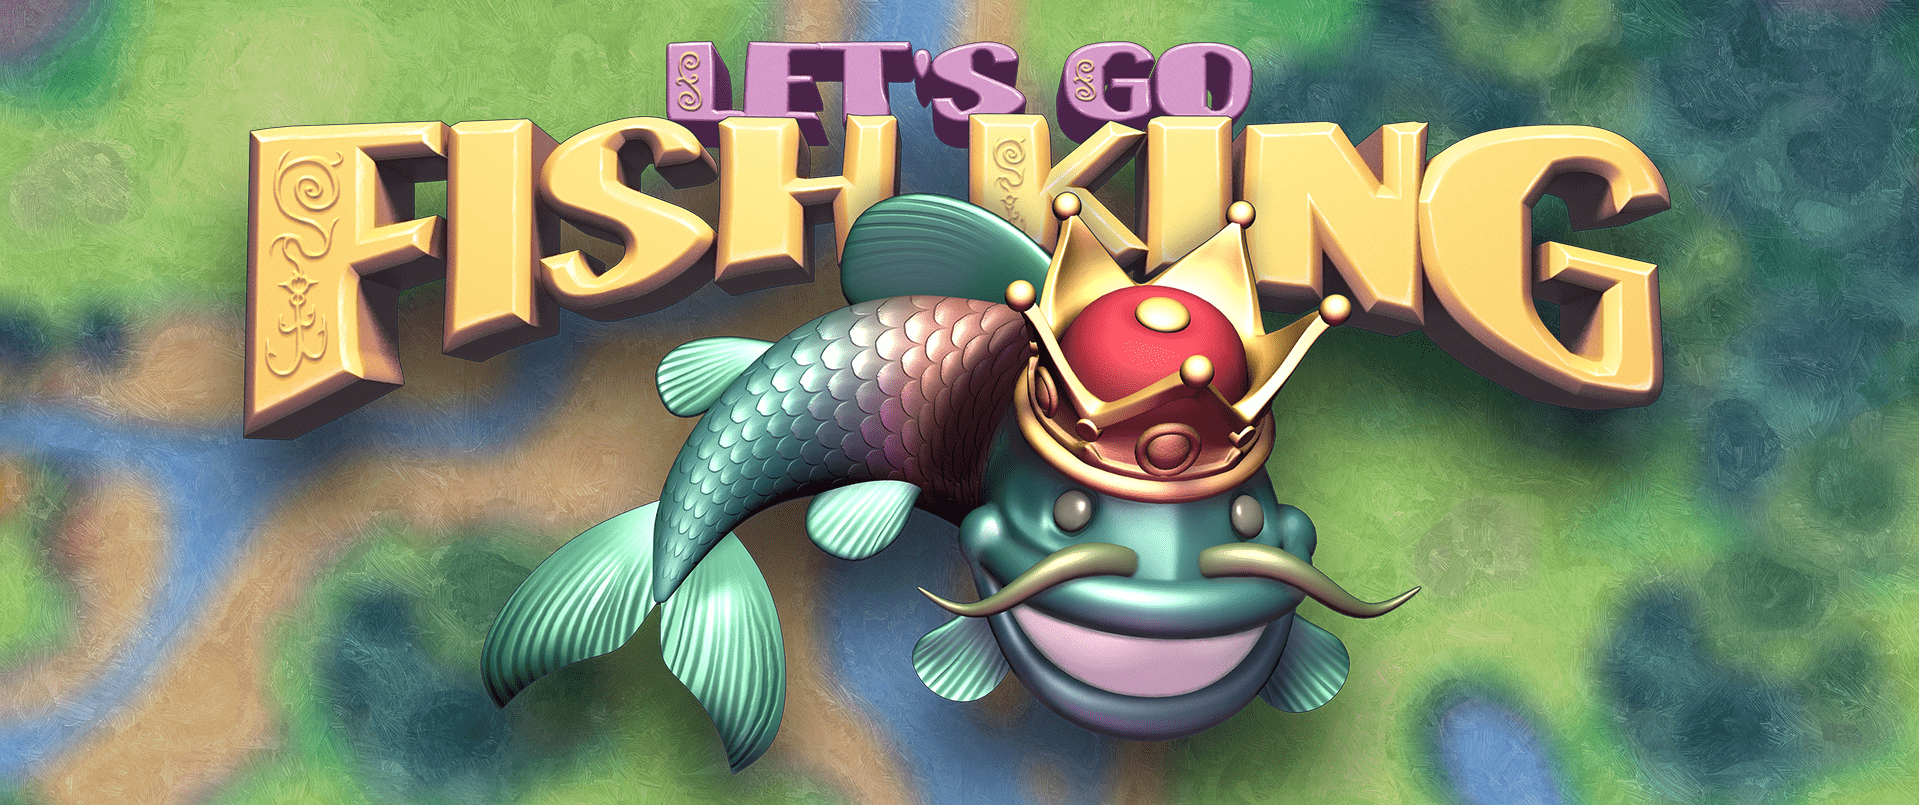 Let's Go Fish King!